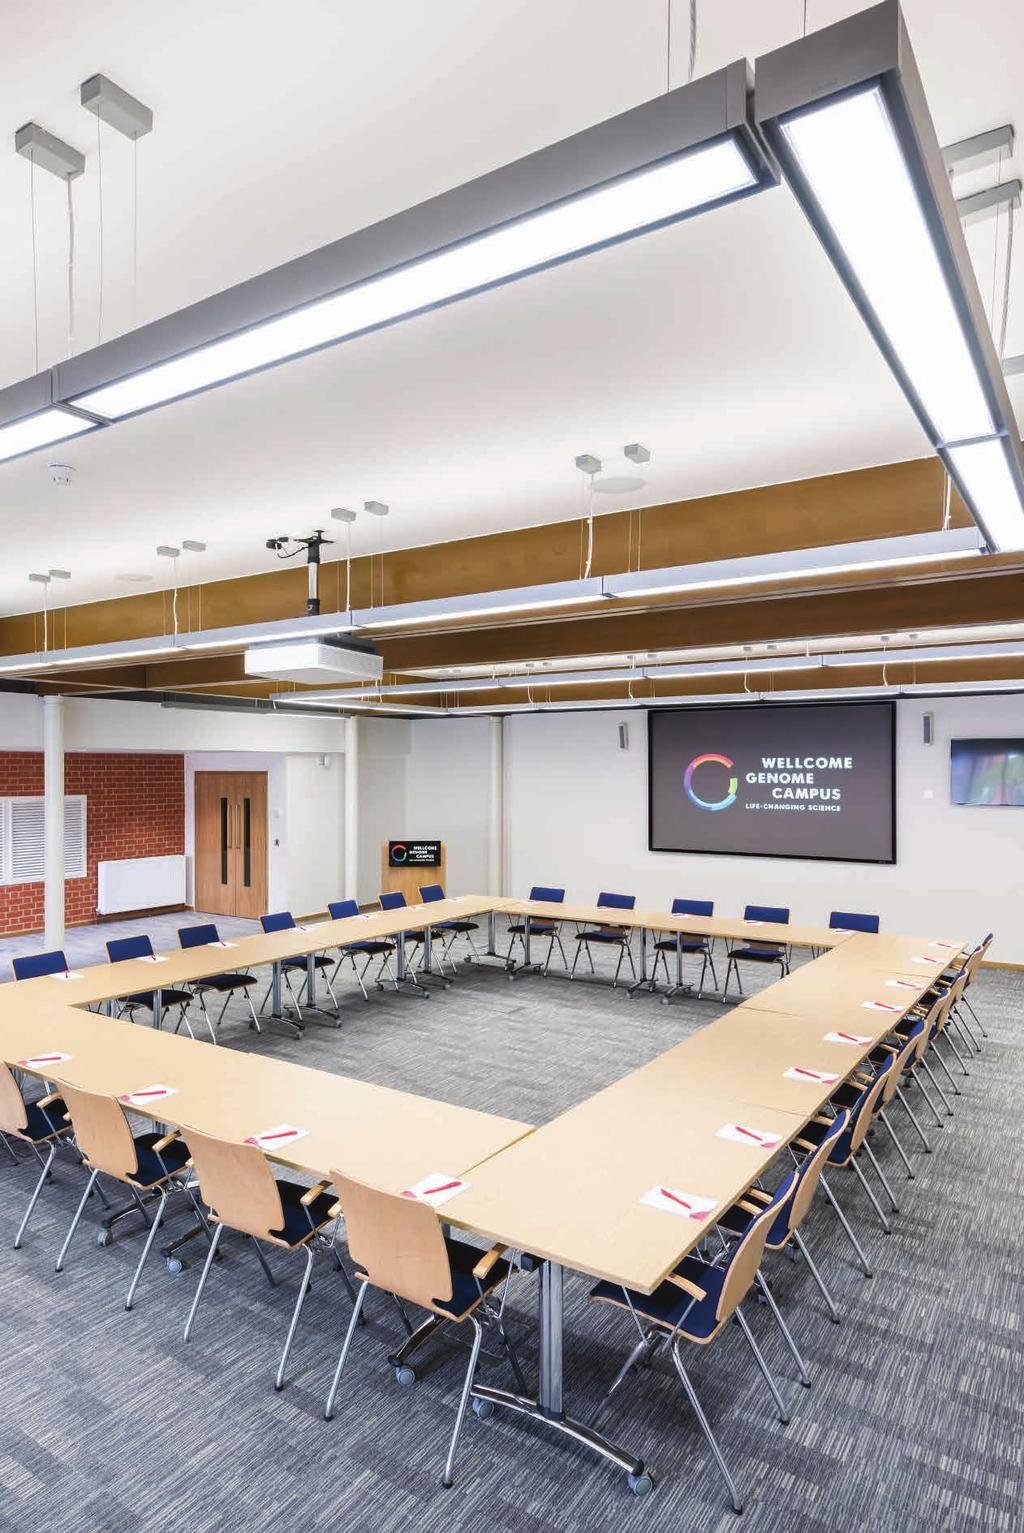 The Conference Centre opened its state-of-the-art facilities in October 2015.